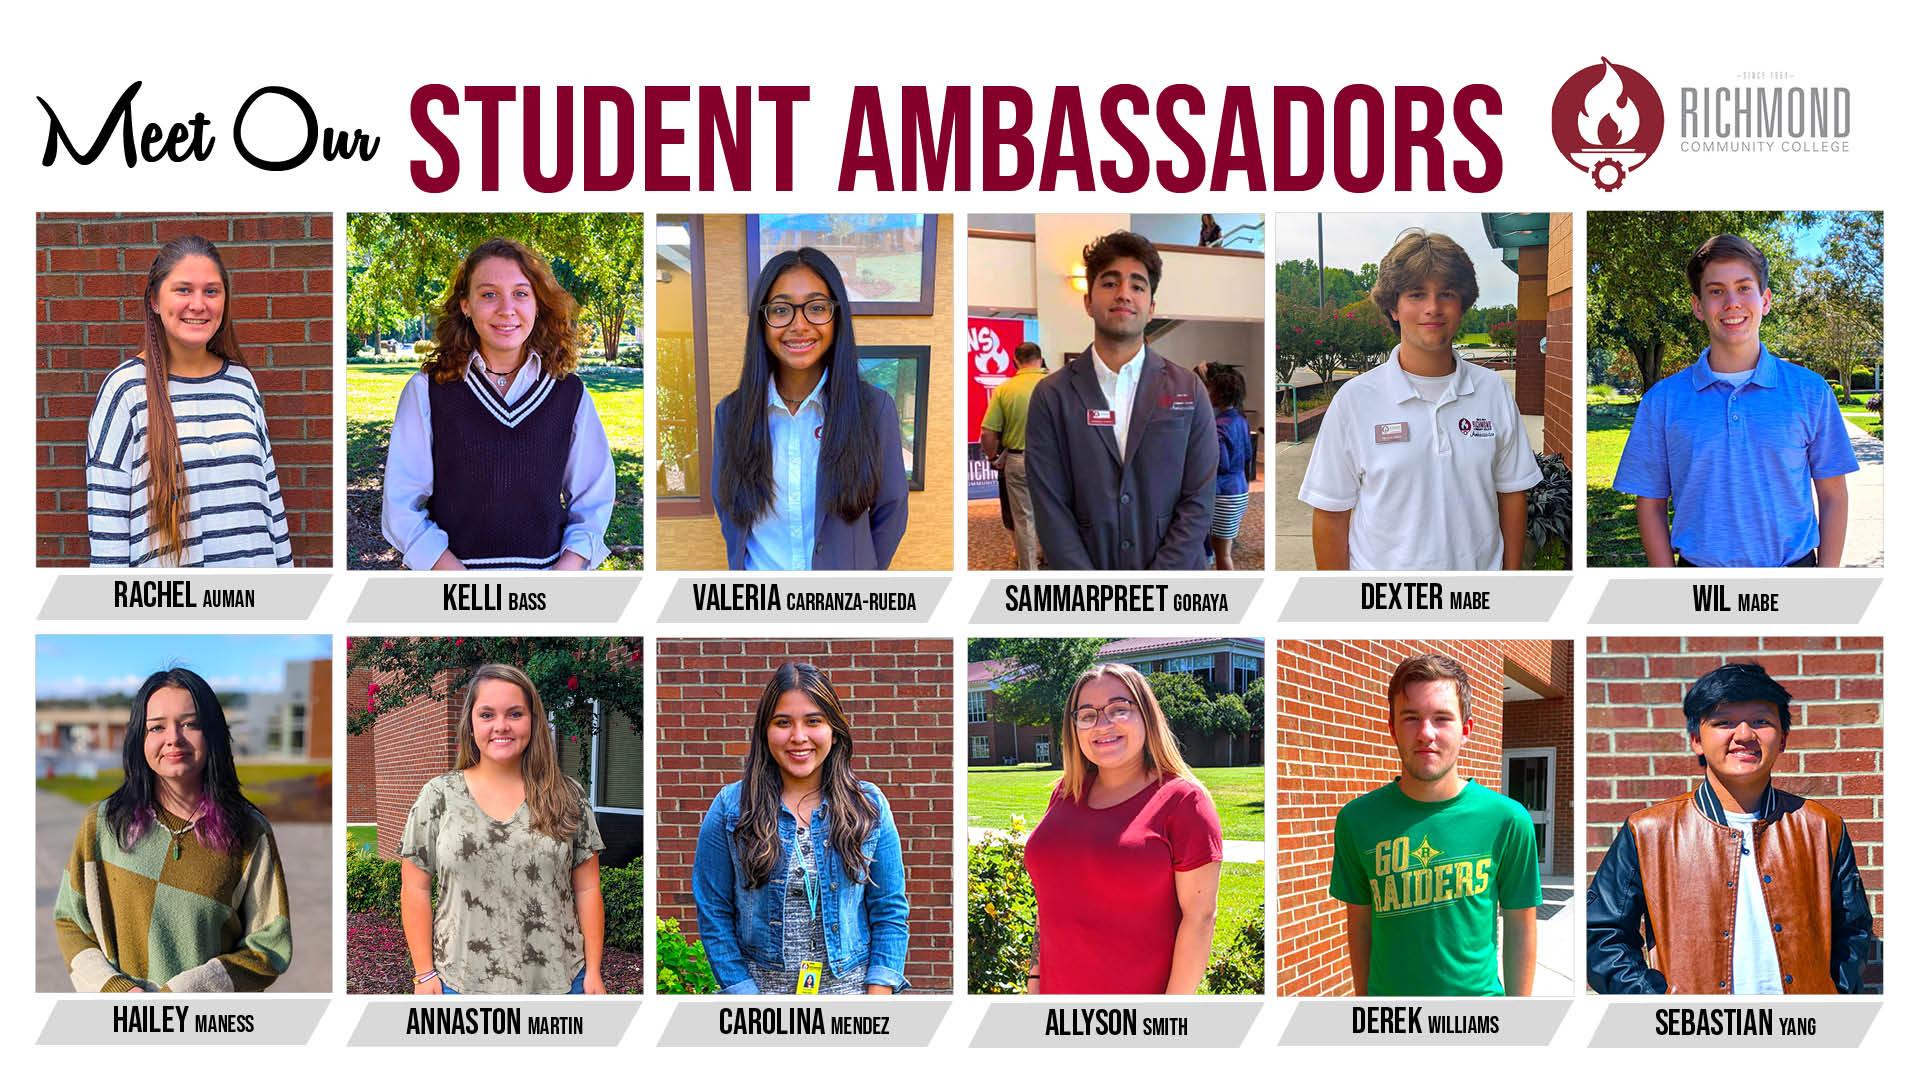 Collage of all the Student Ambassadors